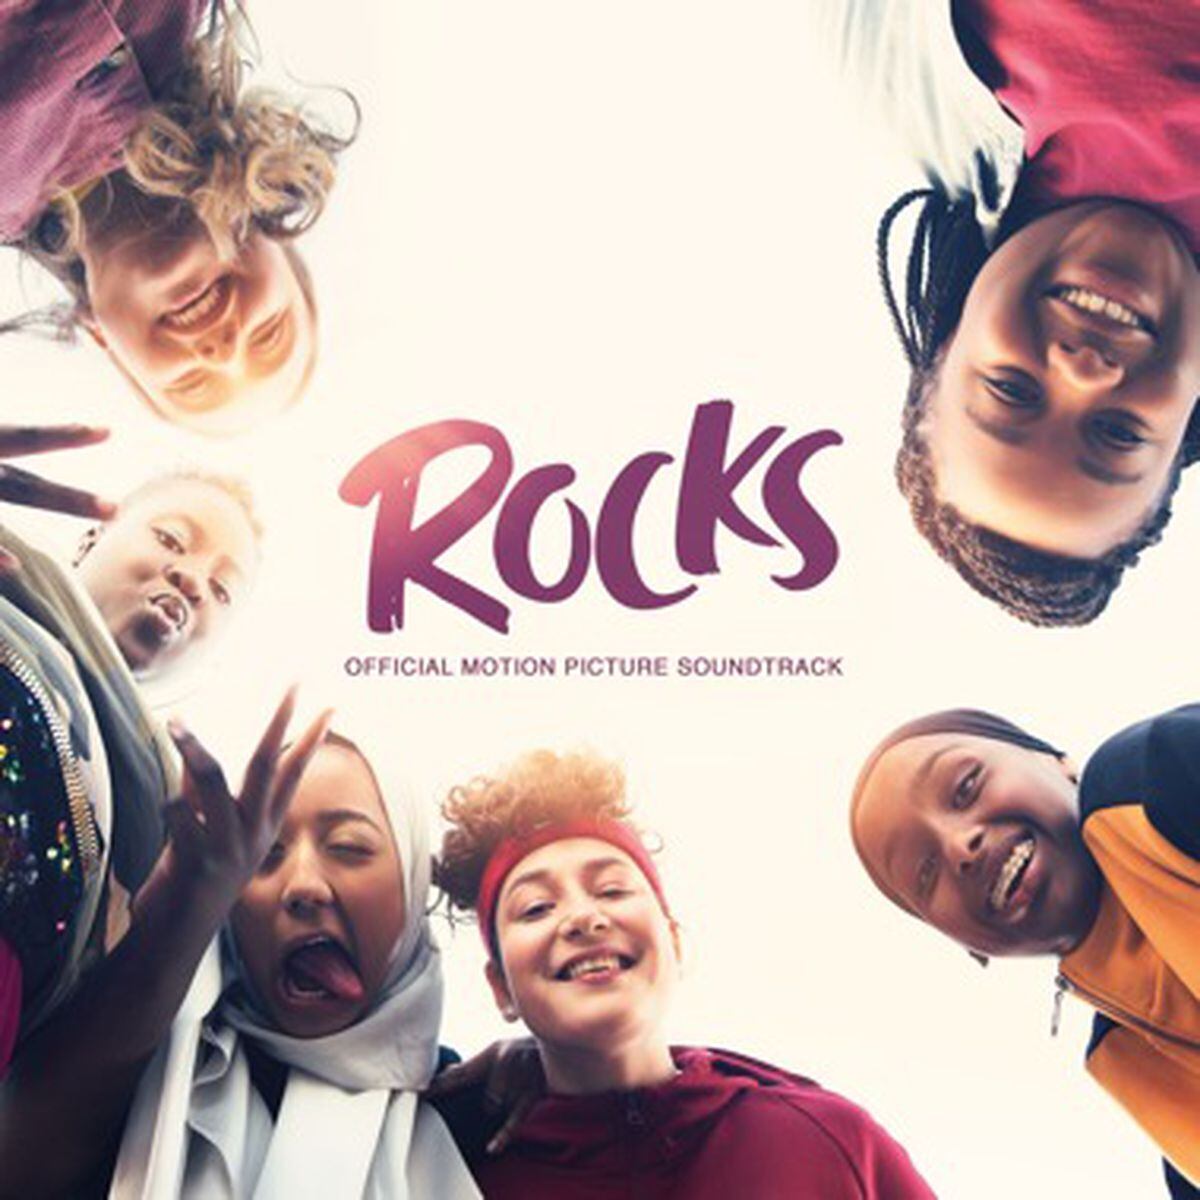 The official soundtrack for ROCKS, released by Island Records